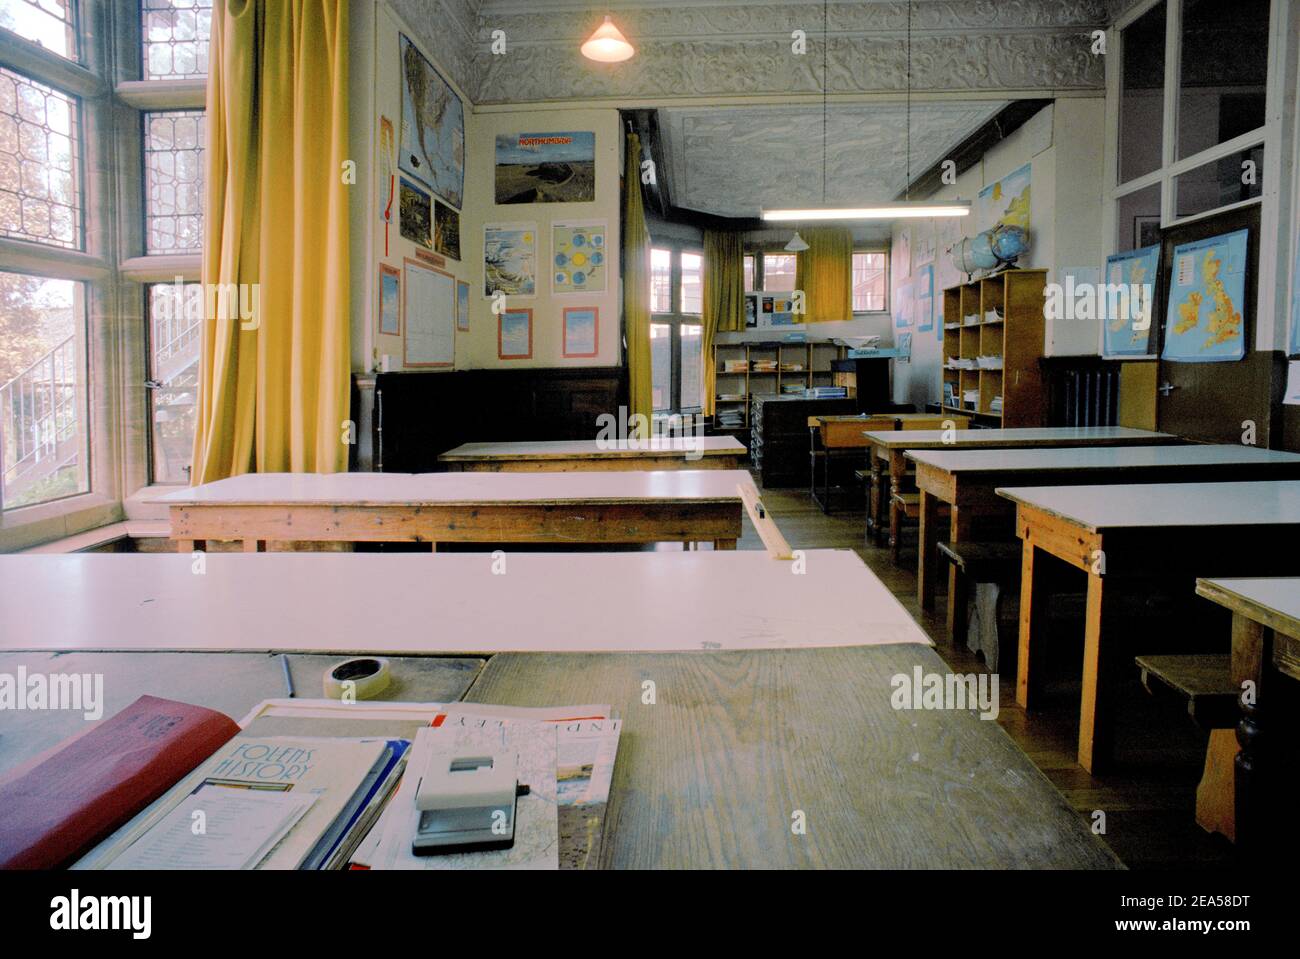 Old Empty Classroom with Desks Stock Photo